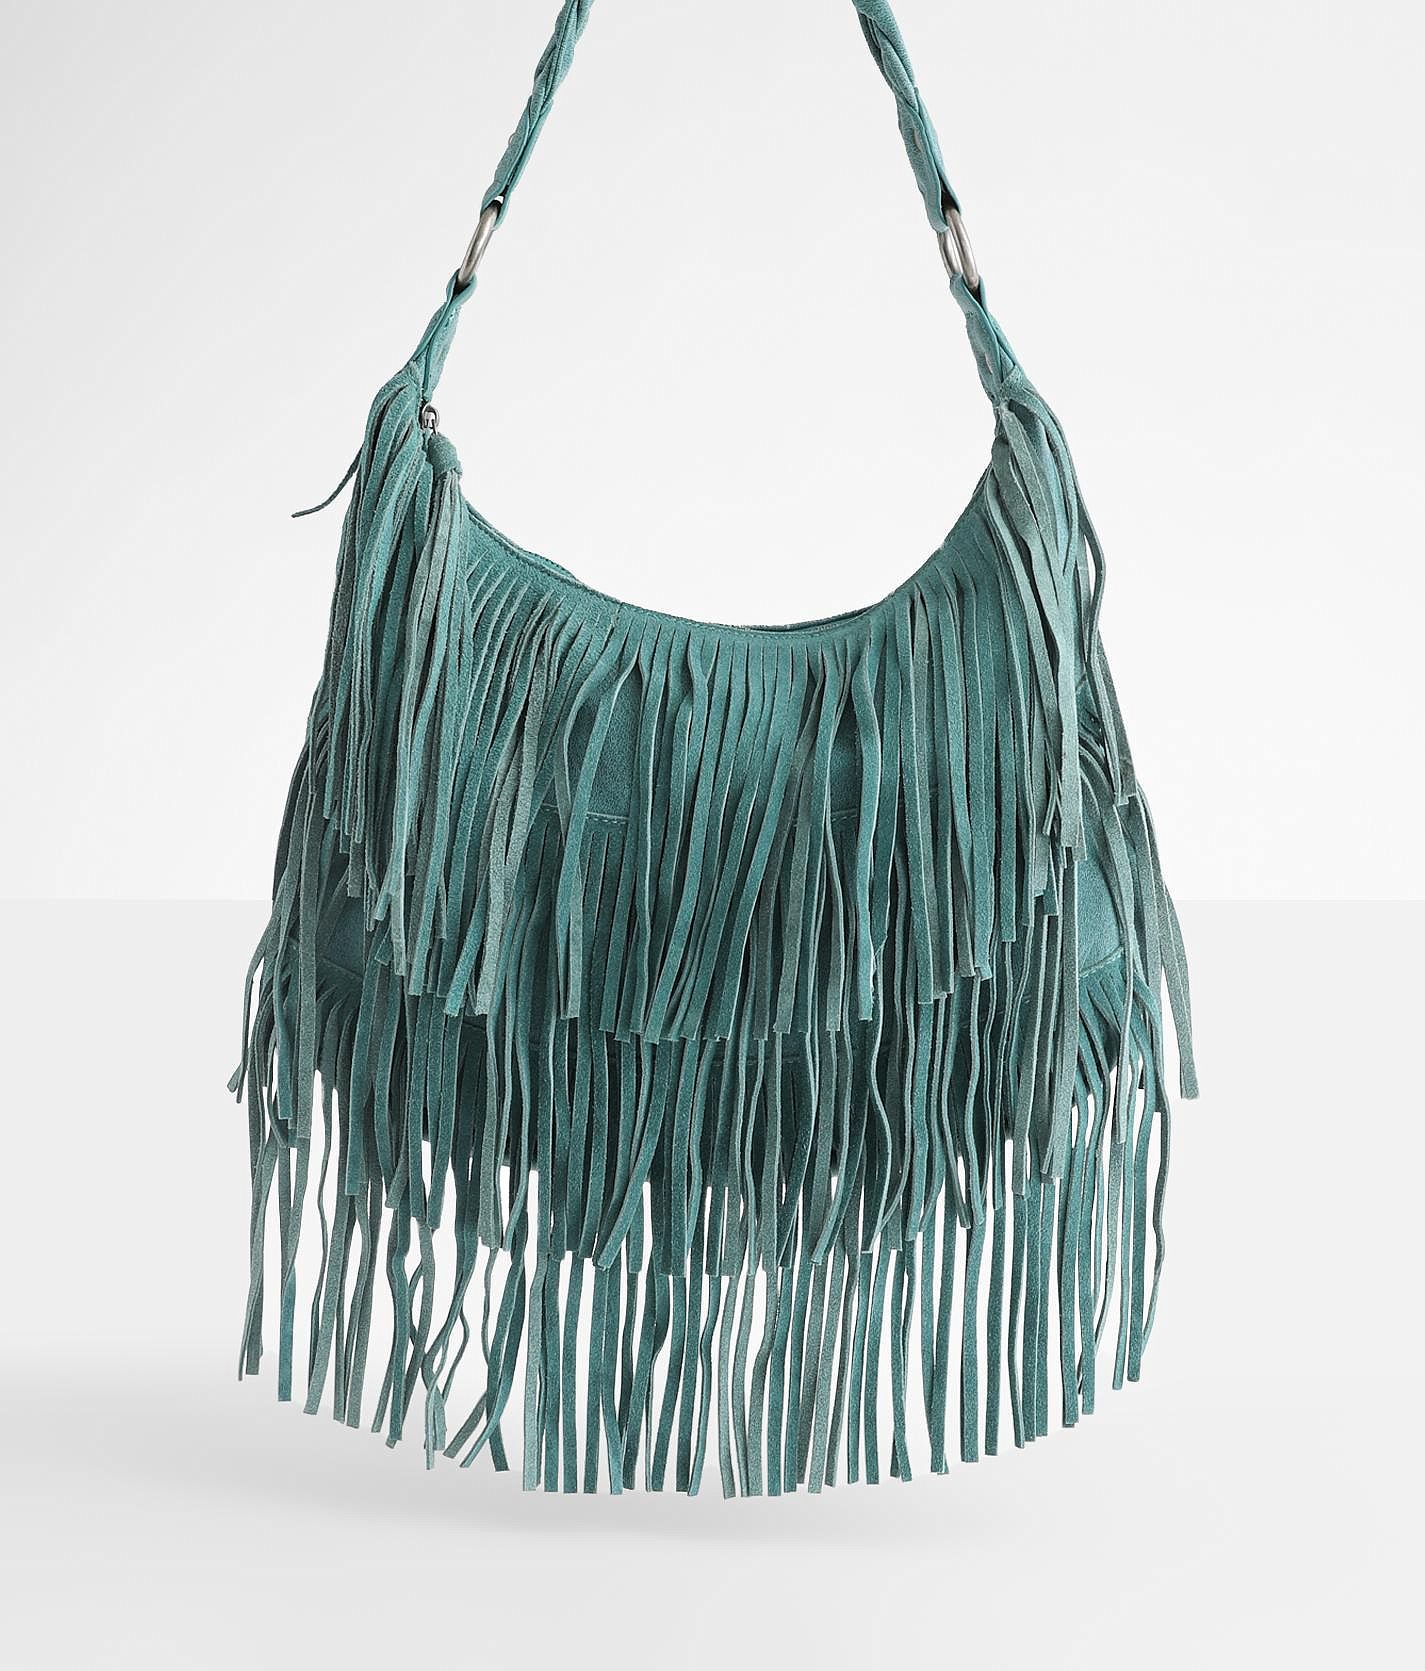 Wrangler Tiered Fringe Purse - Women's Bags in Turquoise